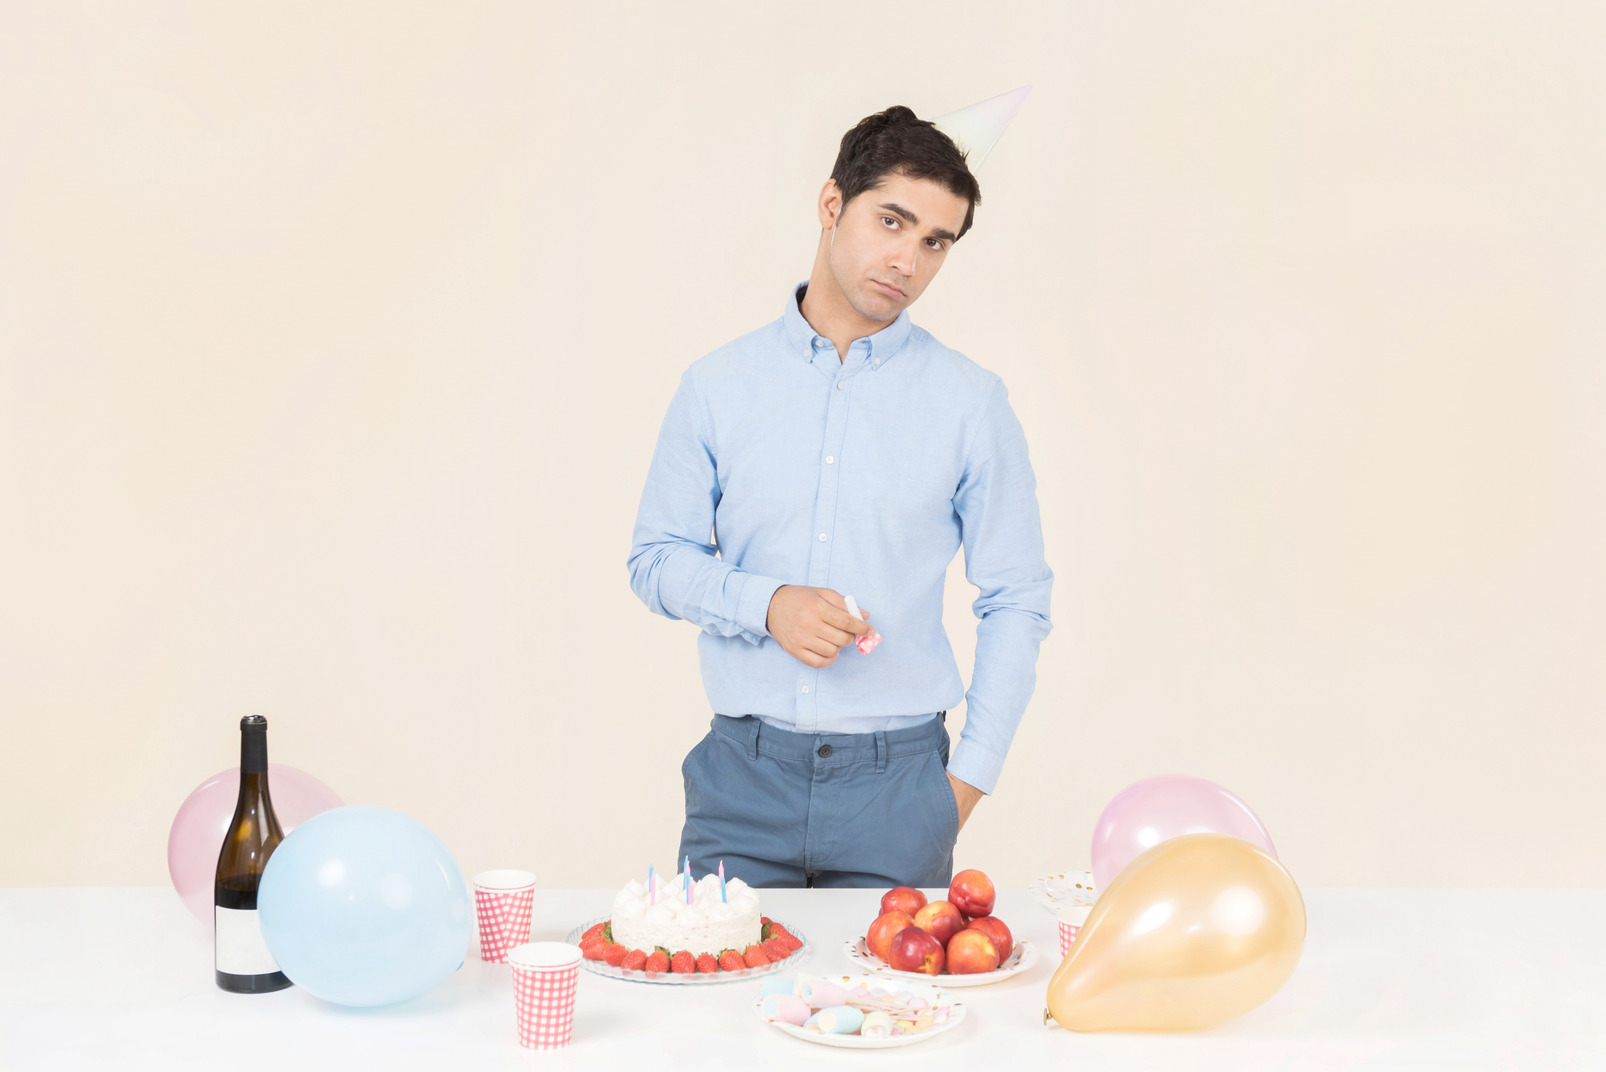 Young caucasian man standing near birthday table